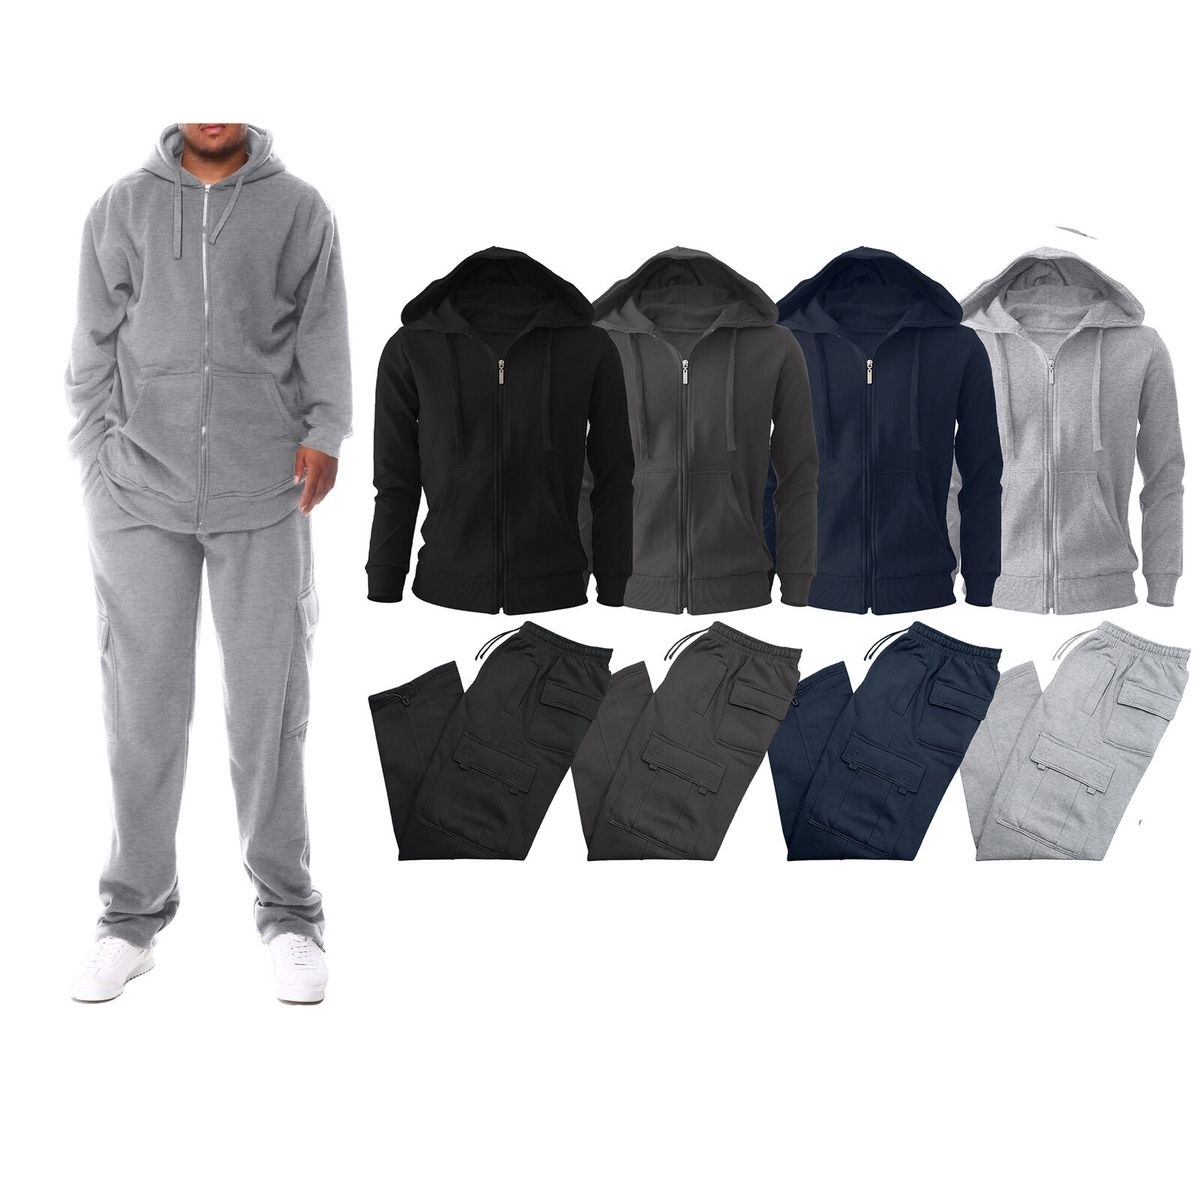 Multi-Pack: Men's Big & Tall Winter Warm Athletic Active Cozy Fleece Lined Multi-Pocket Full Zip Up Cargo Tracksuit - Grey, 1-pack, X-large